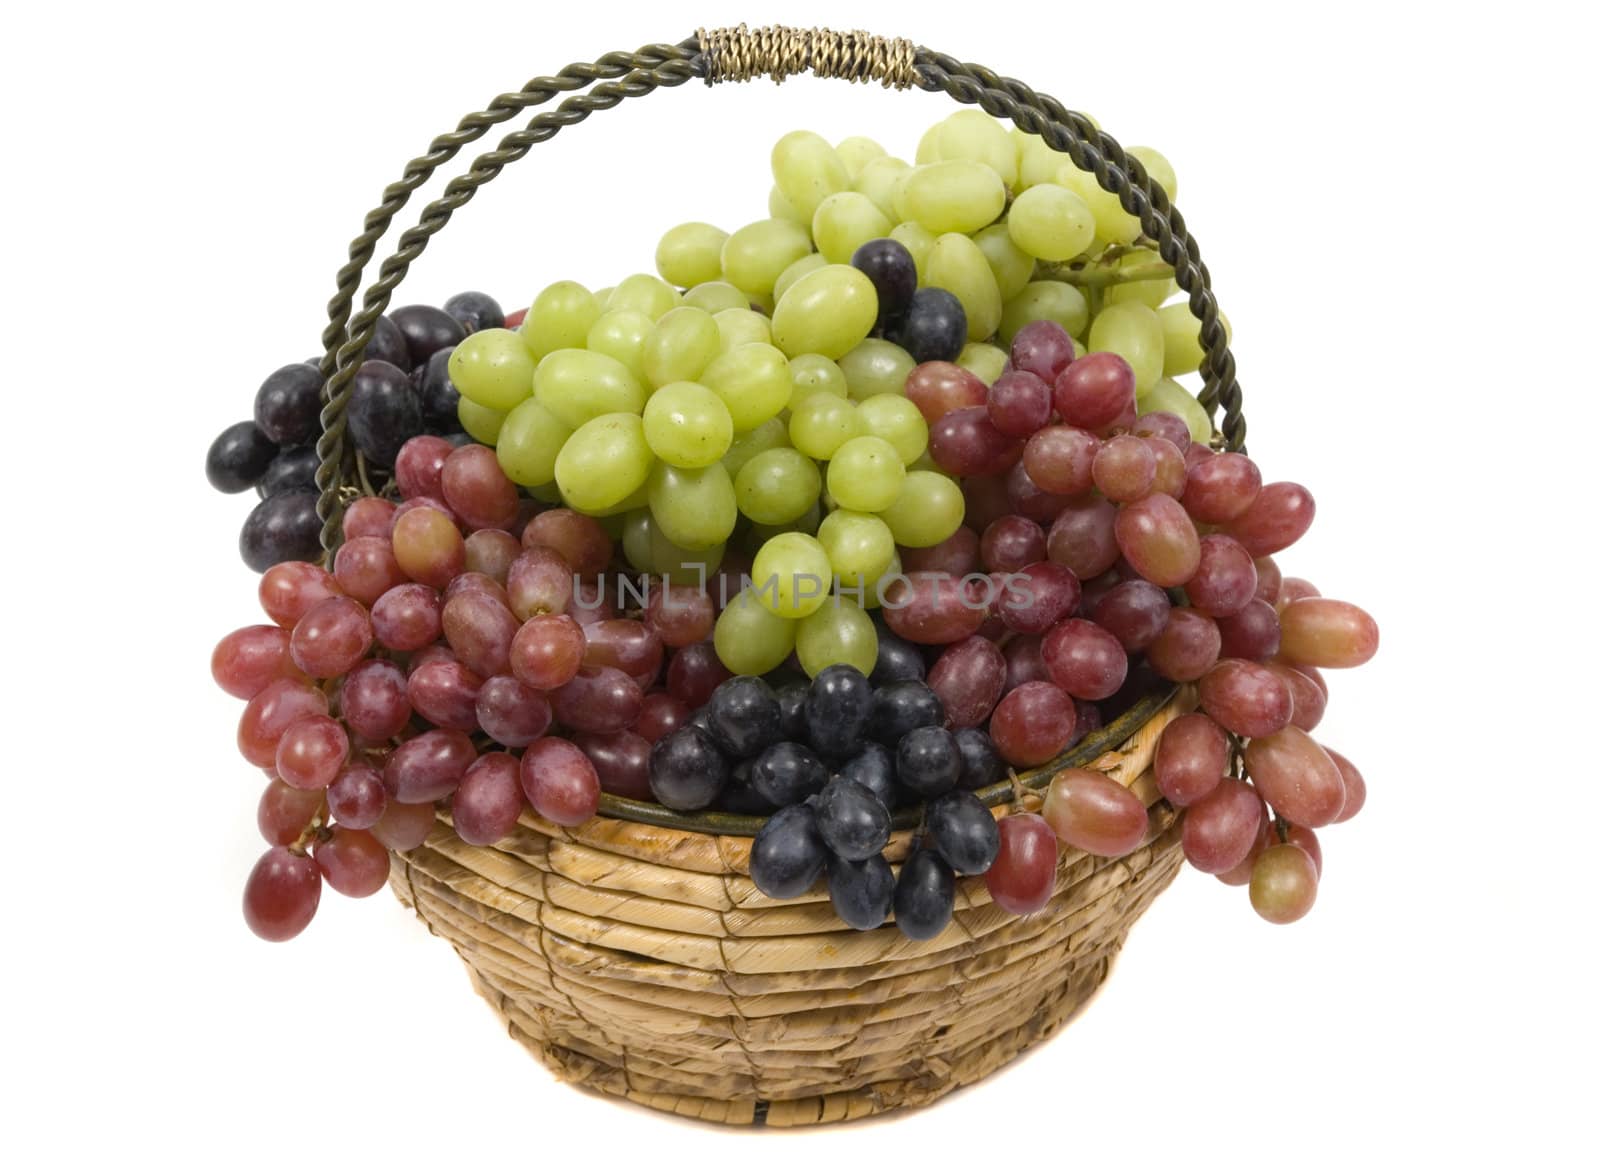 Grapes by BVDC